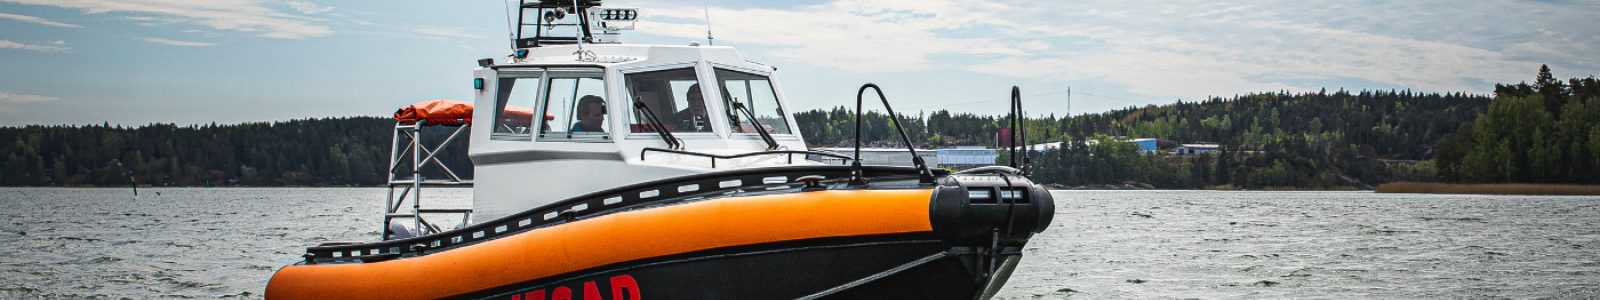 Arctic Airboats- A8 fender system SAR boat